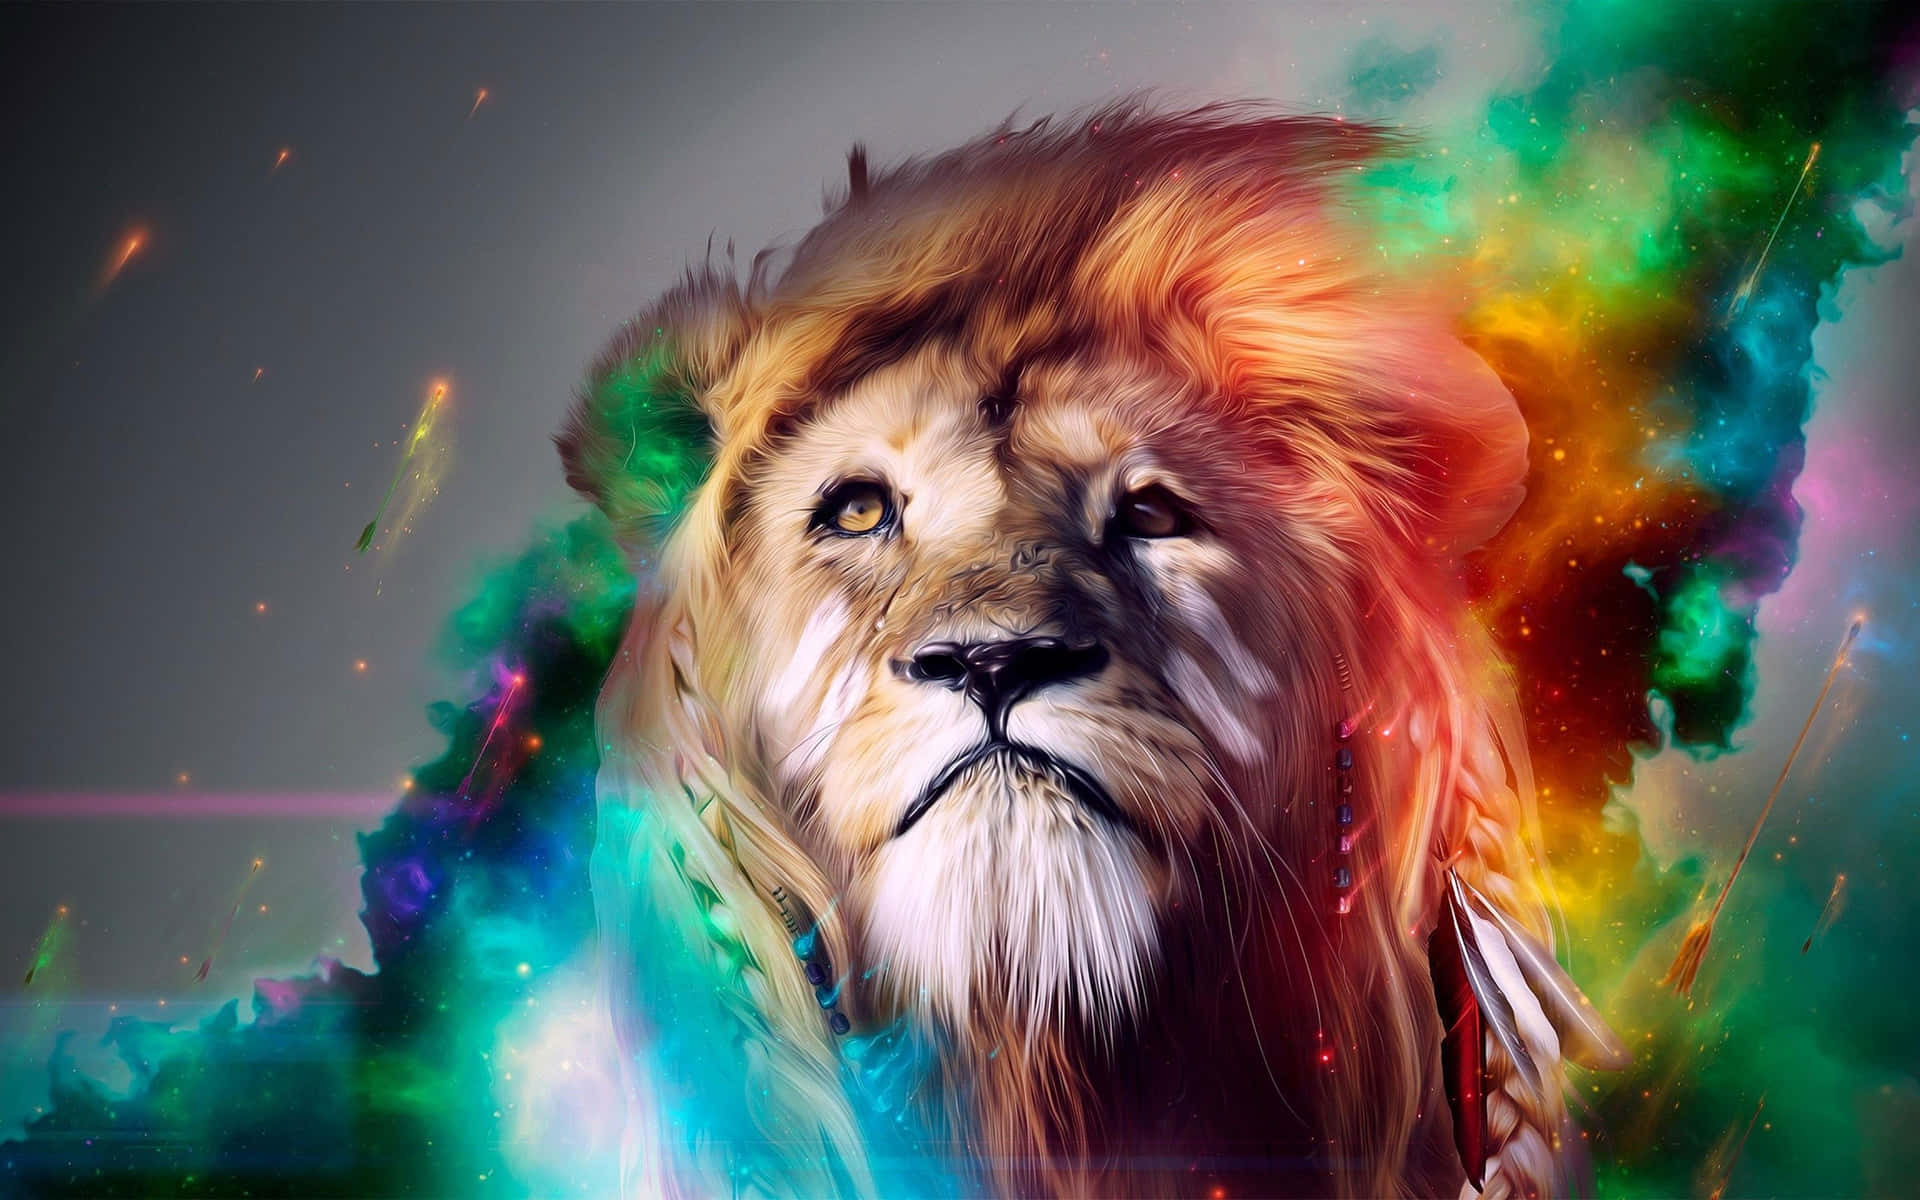 Very Colorful Coat Of The Lion Wallpaper